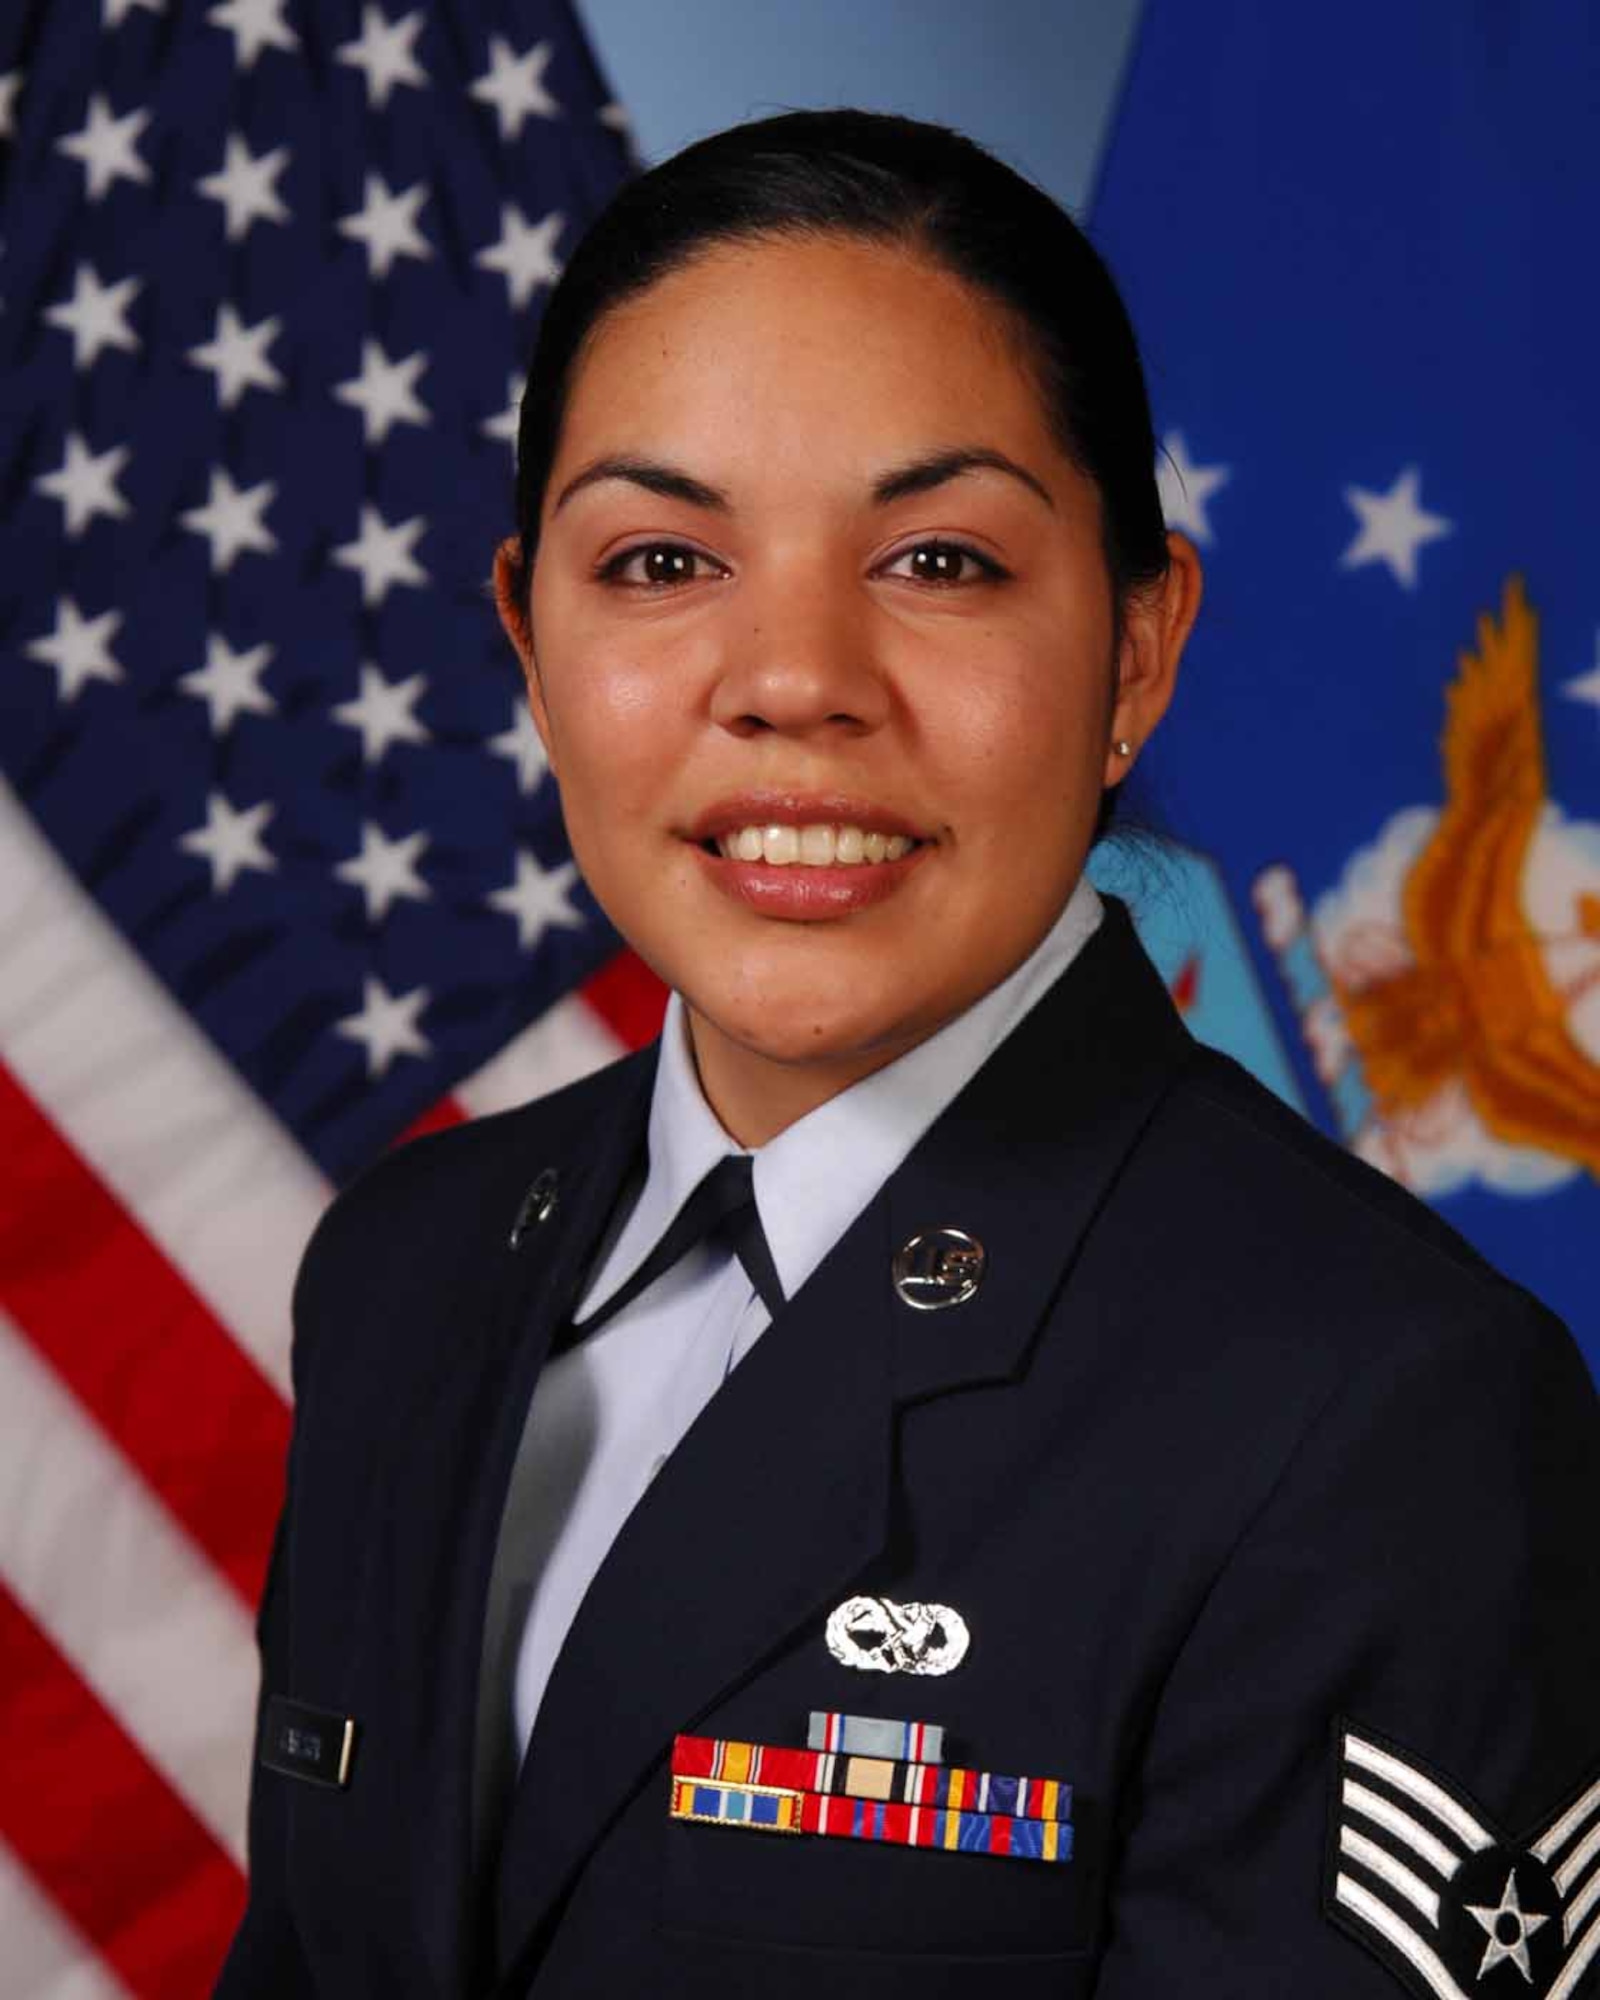 SHAW AIR FORCE BASE, S.C. -- The 20th Fighter Wing announced its annual award winners during a ceremony Feb. 9. Staff Sgt. Othelia Carlson, 20th Communications Squadron, is the 20th FW NCO of the Year.